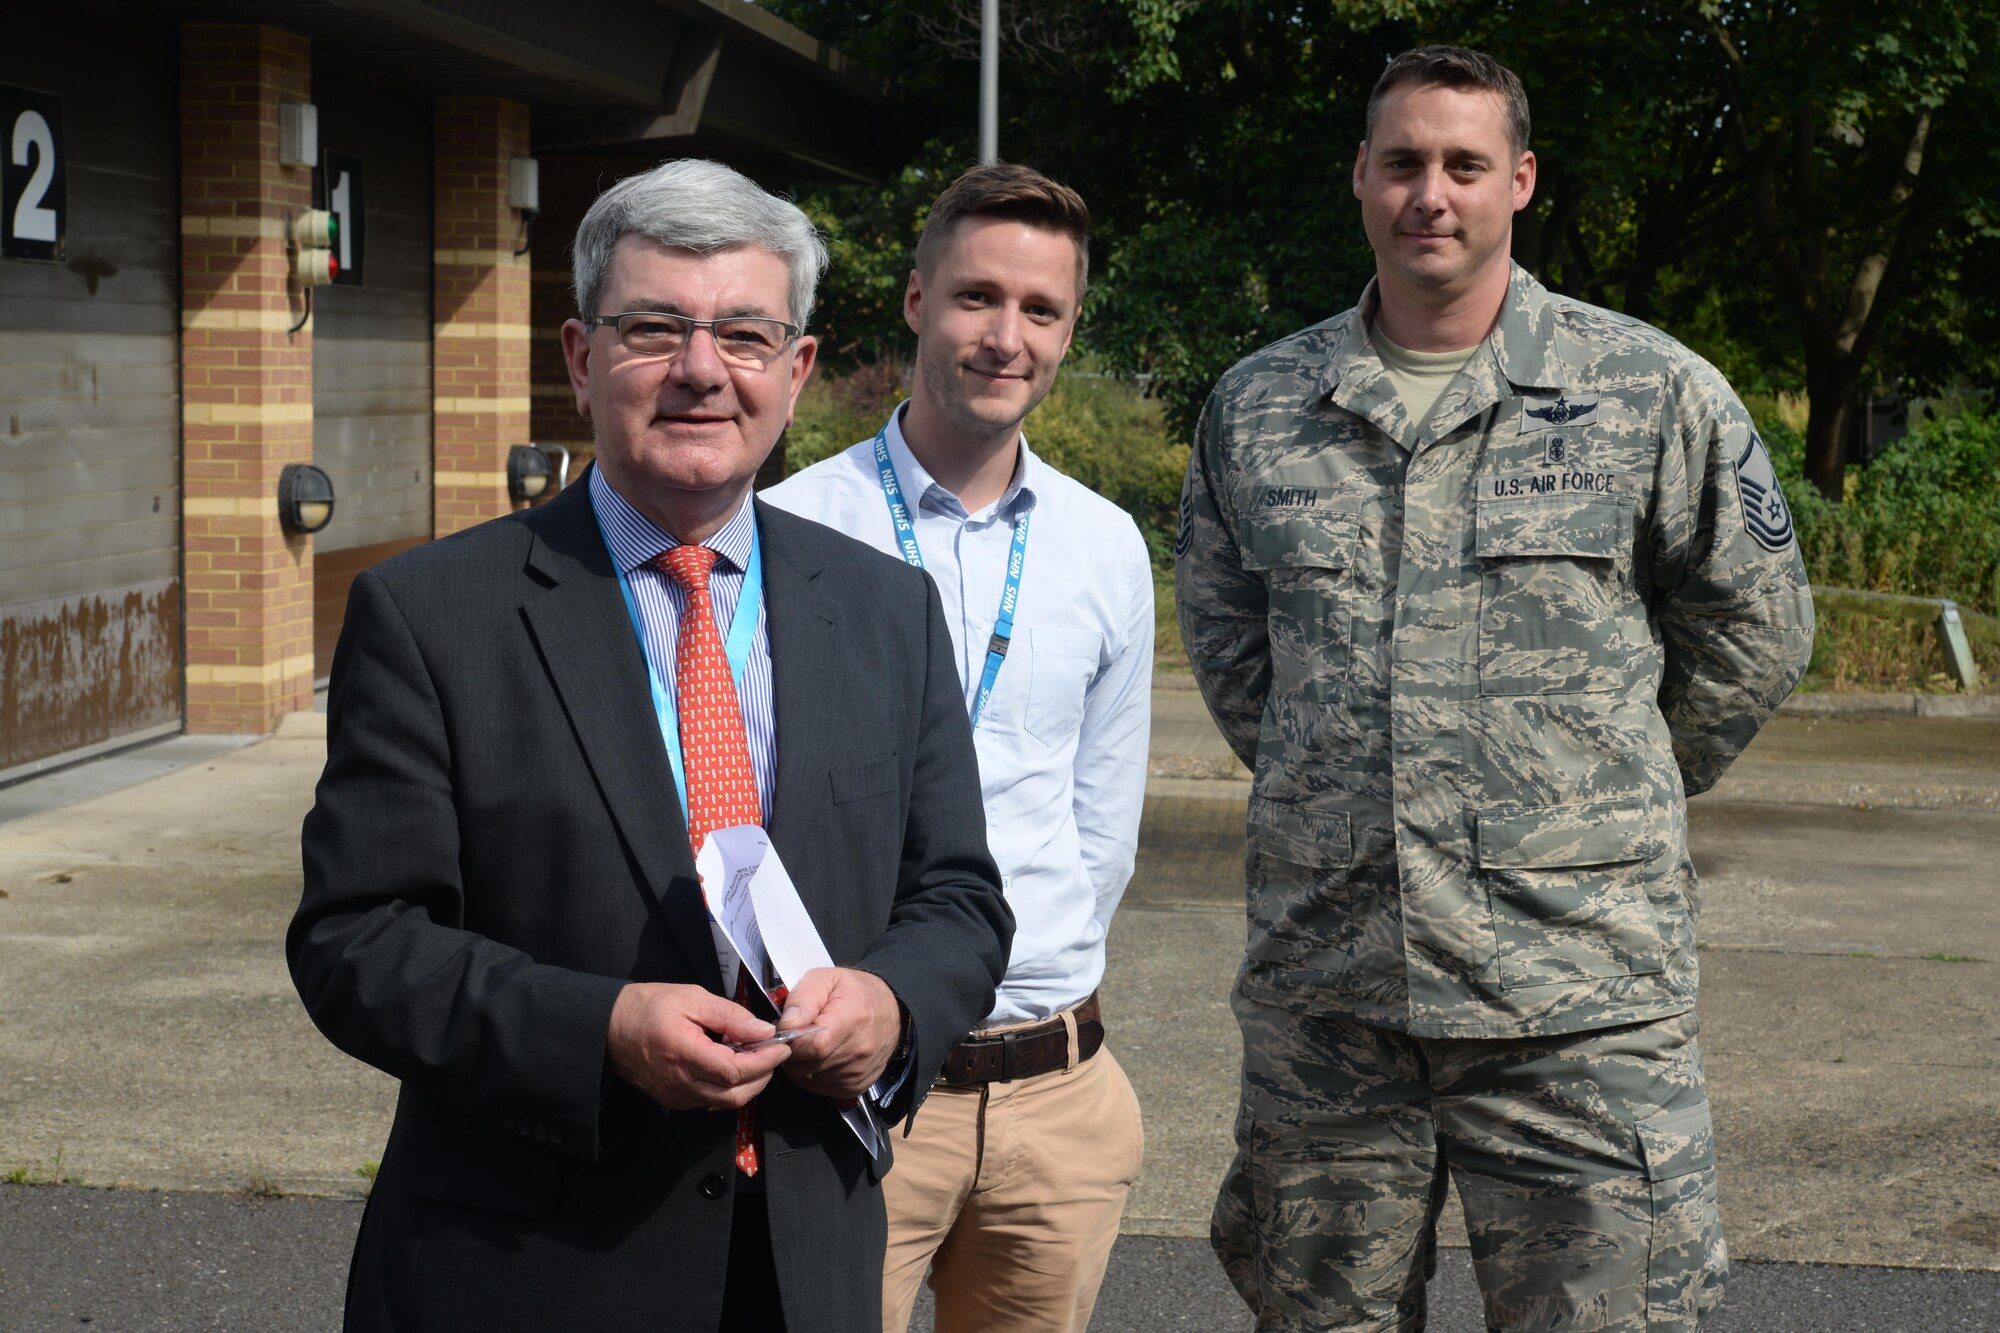 Sir Keith Pearson, left, the National Health Service’s chairman of Health Education England, poses for a photo with Matthew Friend, Southwest Health and Education England Stakeholder, and U.S. Air Force Master Sgt. Haven Smith, 48th Emergency Services Flight Chief at Royal Air Force Lakenheath, England, Aug. 25, 2016. Pearson visited to see how Liberty medics train. (U.S. Air Force photo/Airman 1st Class Eli Chevalier) 